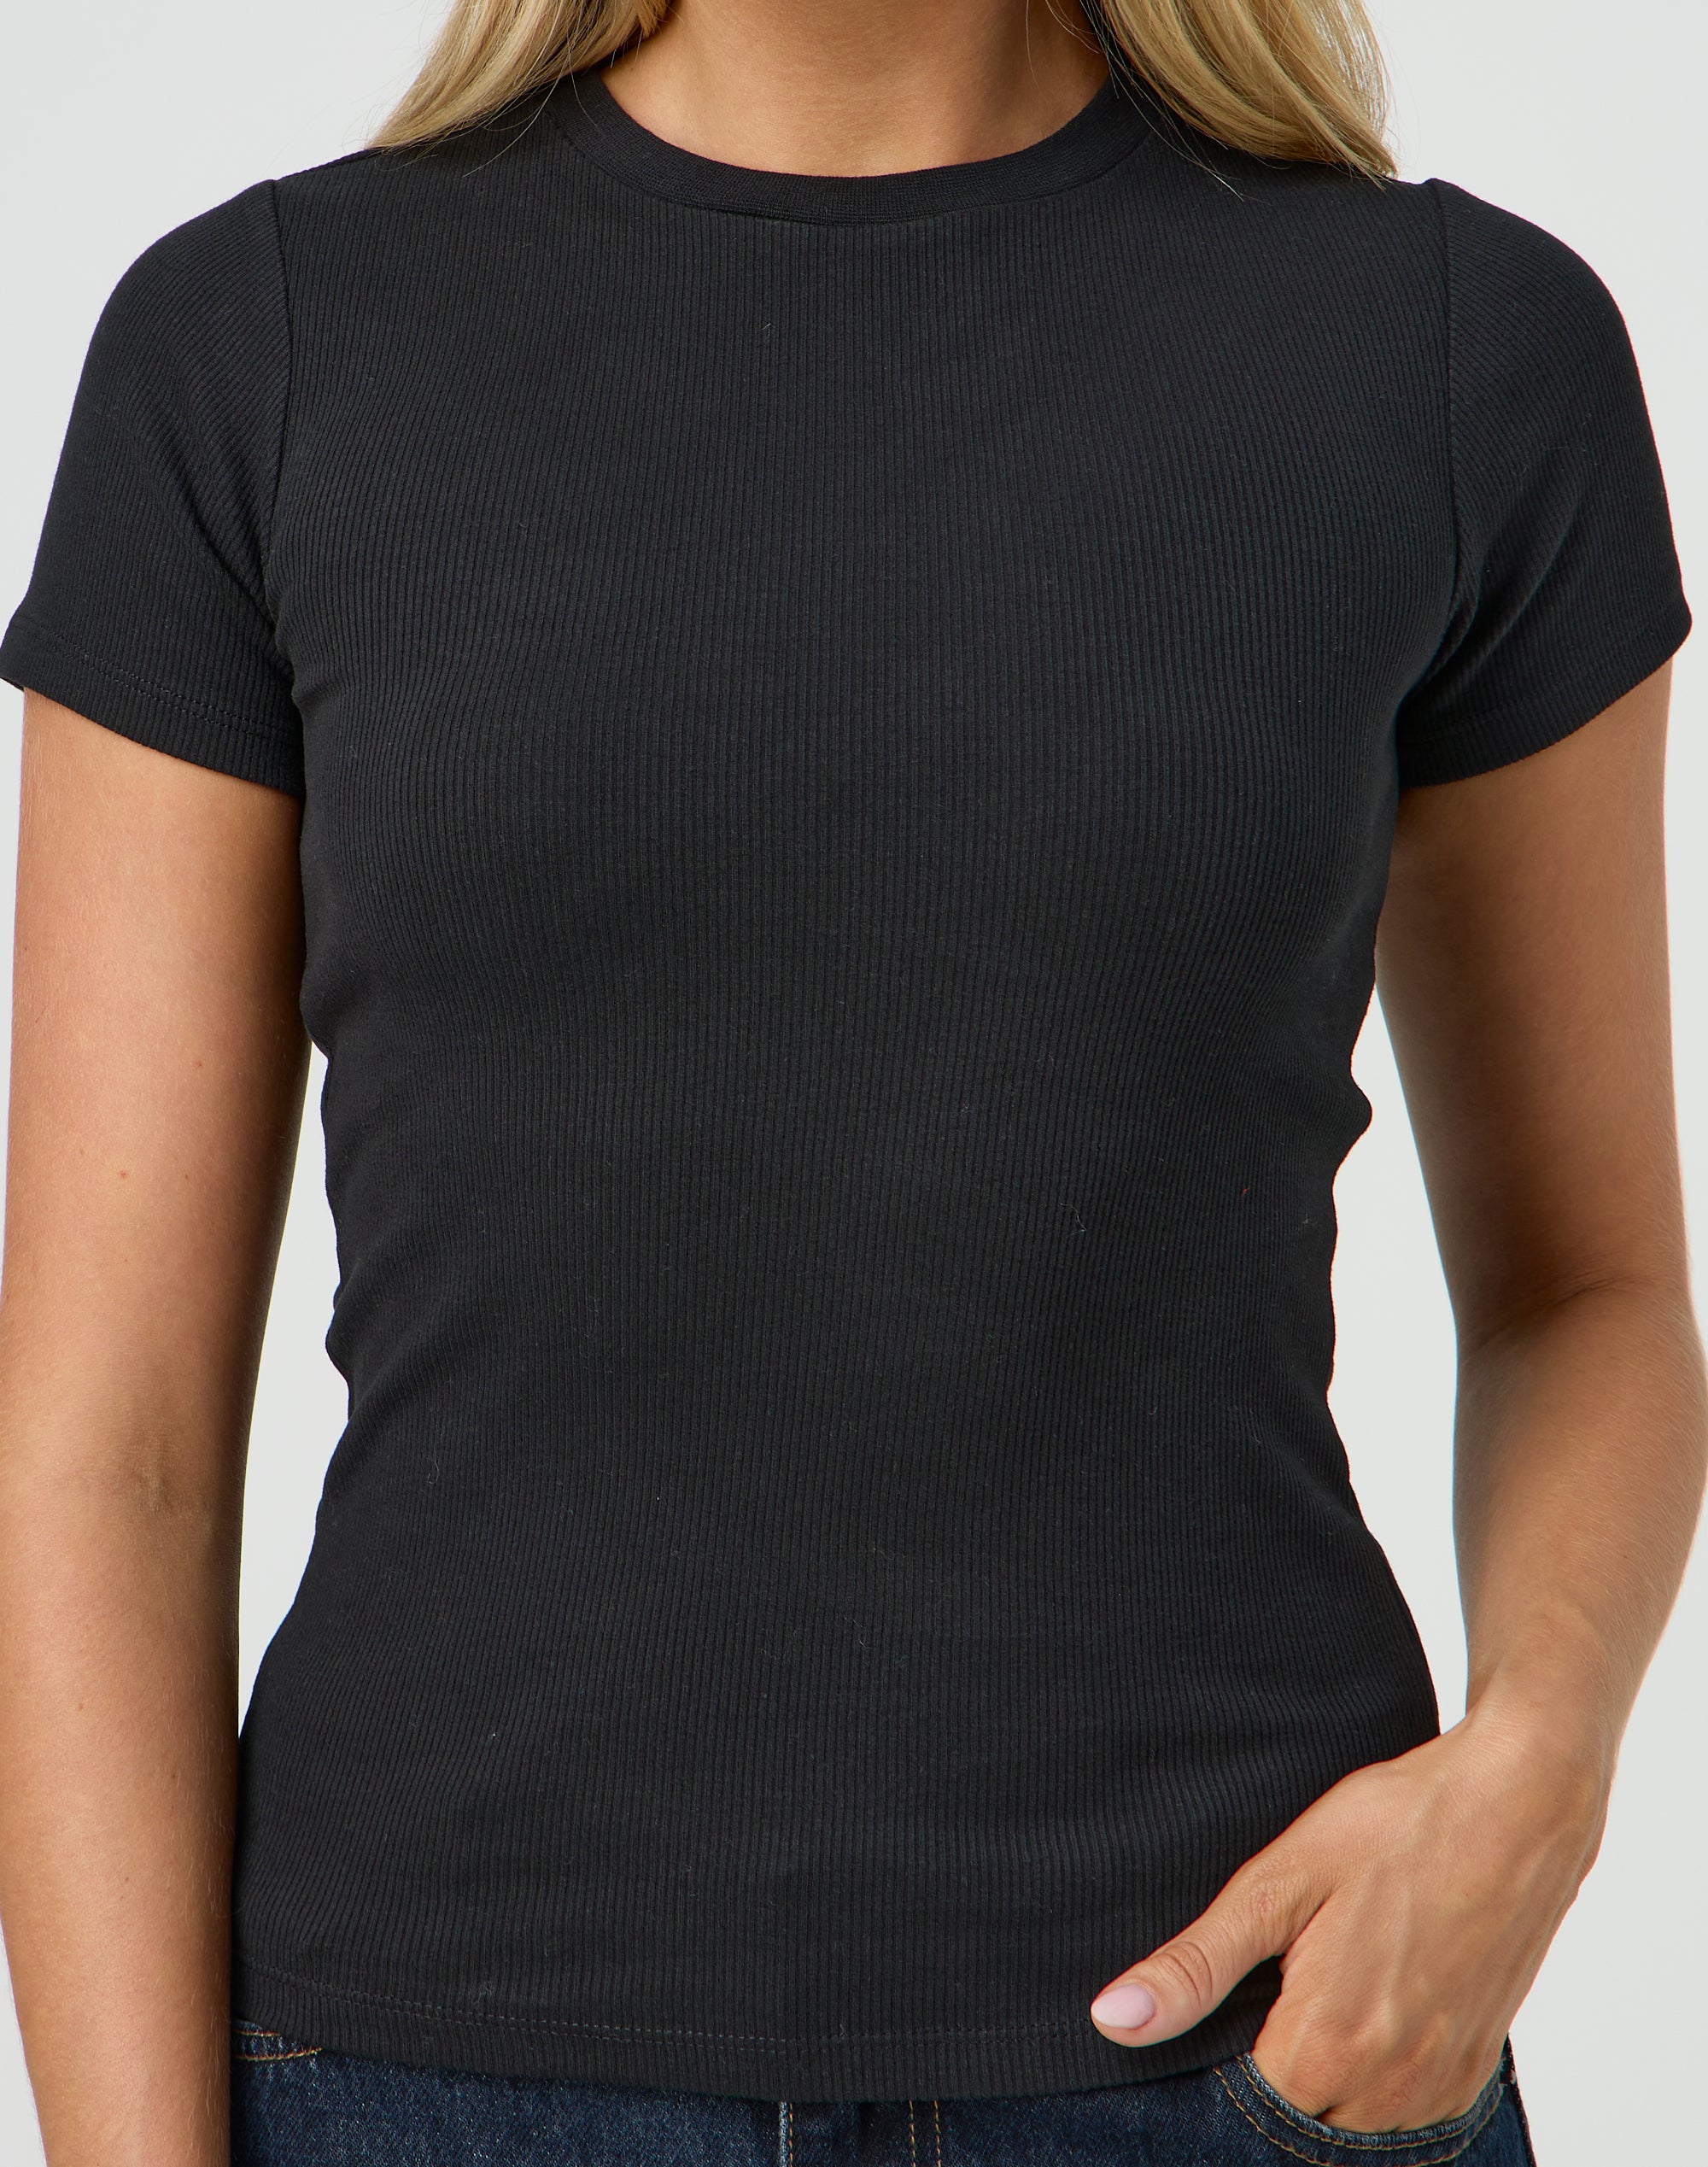 Ribbed Crew Neck Tee in What The Shell